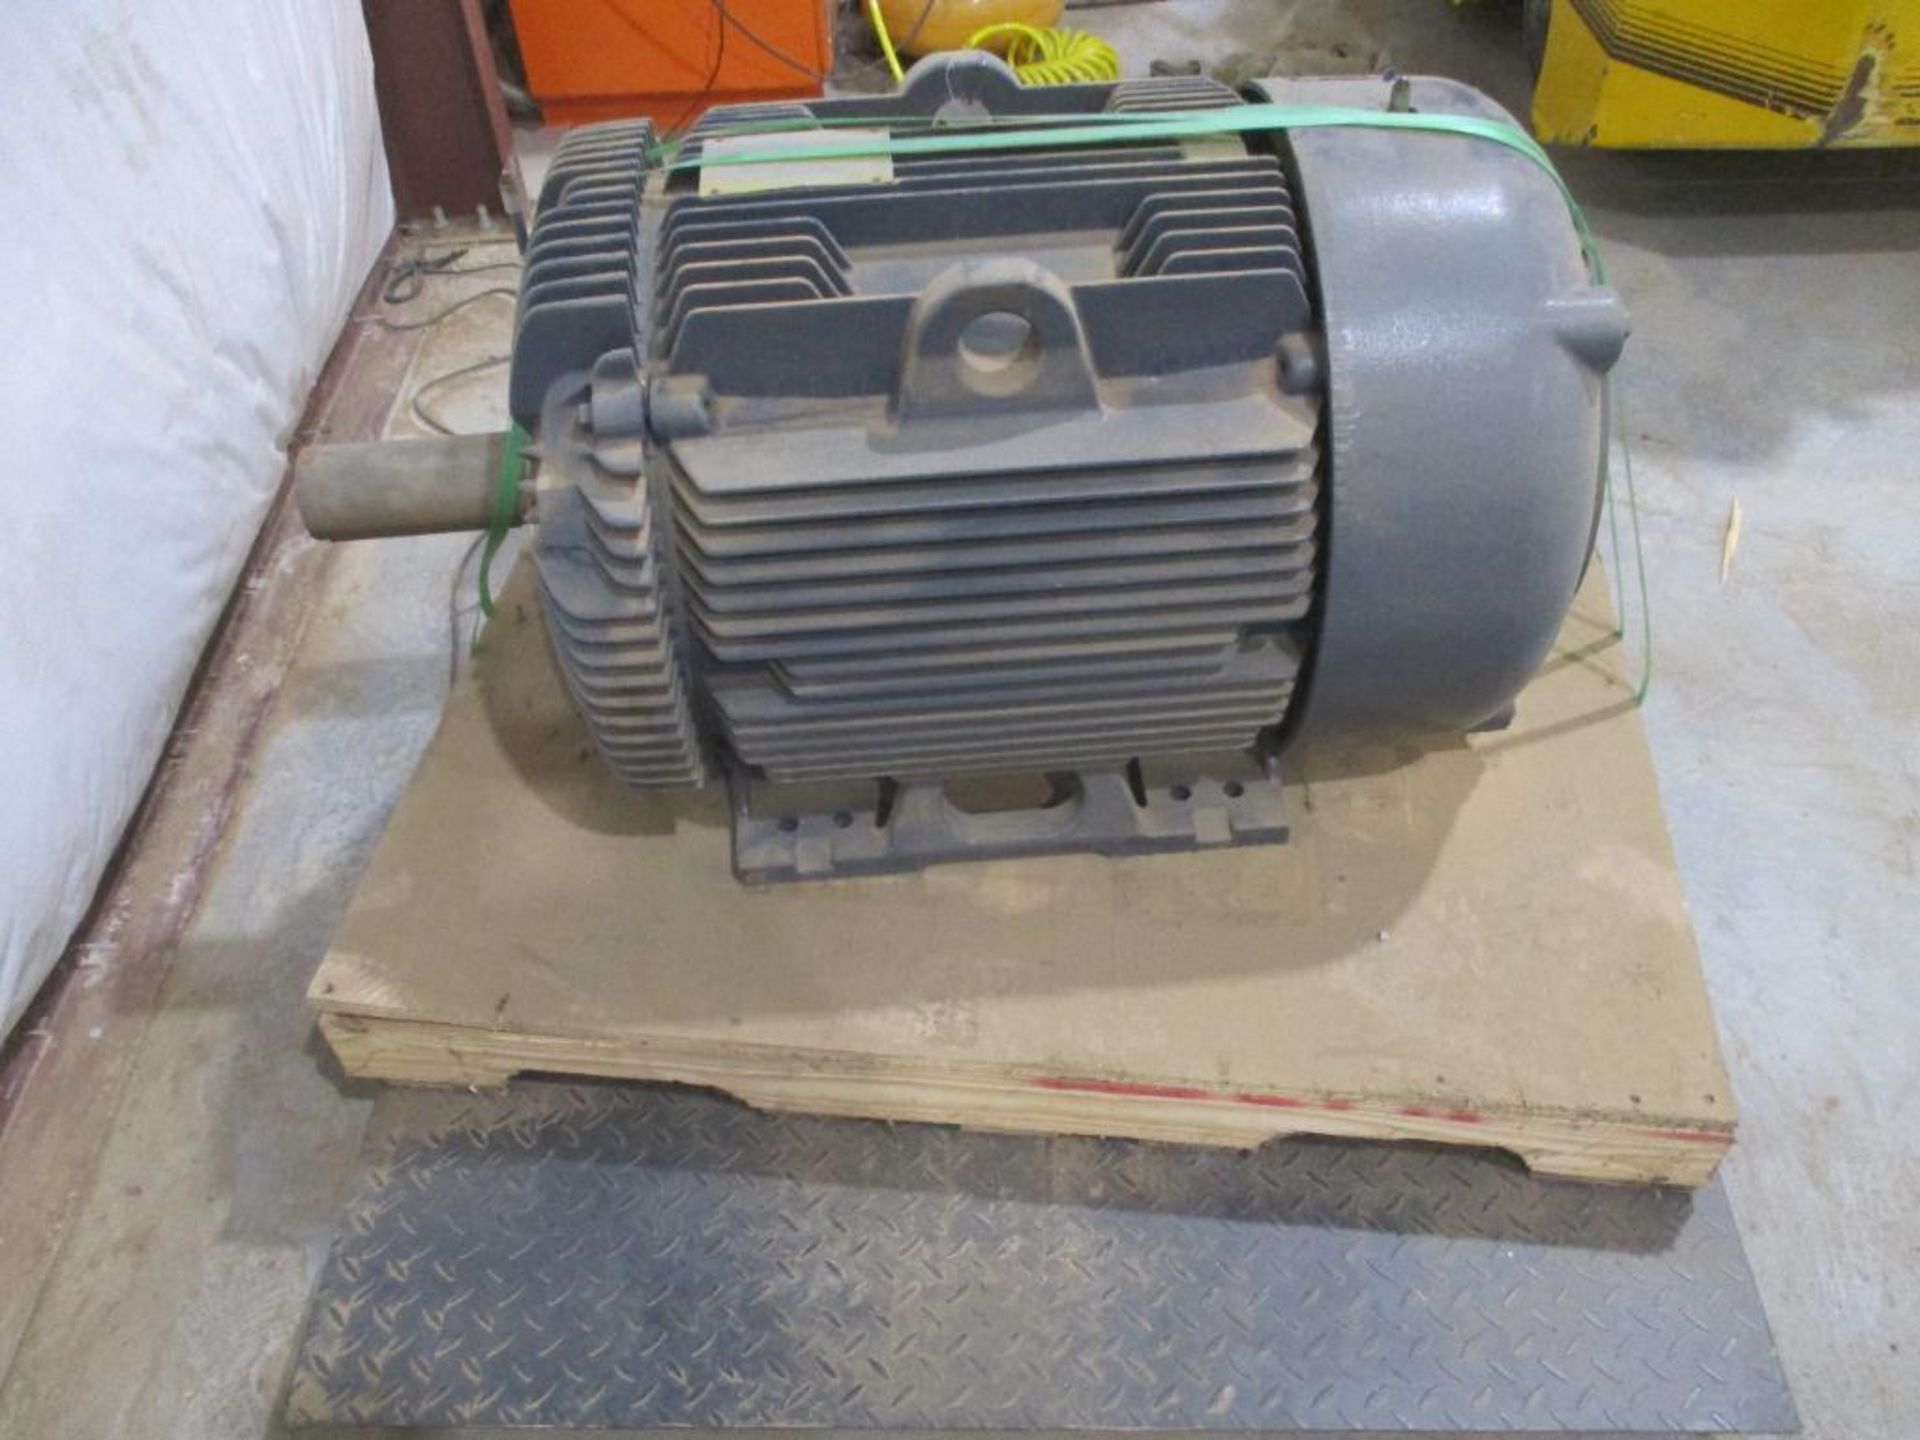 BALDOR 3 PHASE 200HP 1780RPM 445T FRAME A/C MOTOR P/N M4407T-4, 1901# lbs (There will be a $40 Riggi - Image 3 of 6